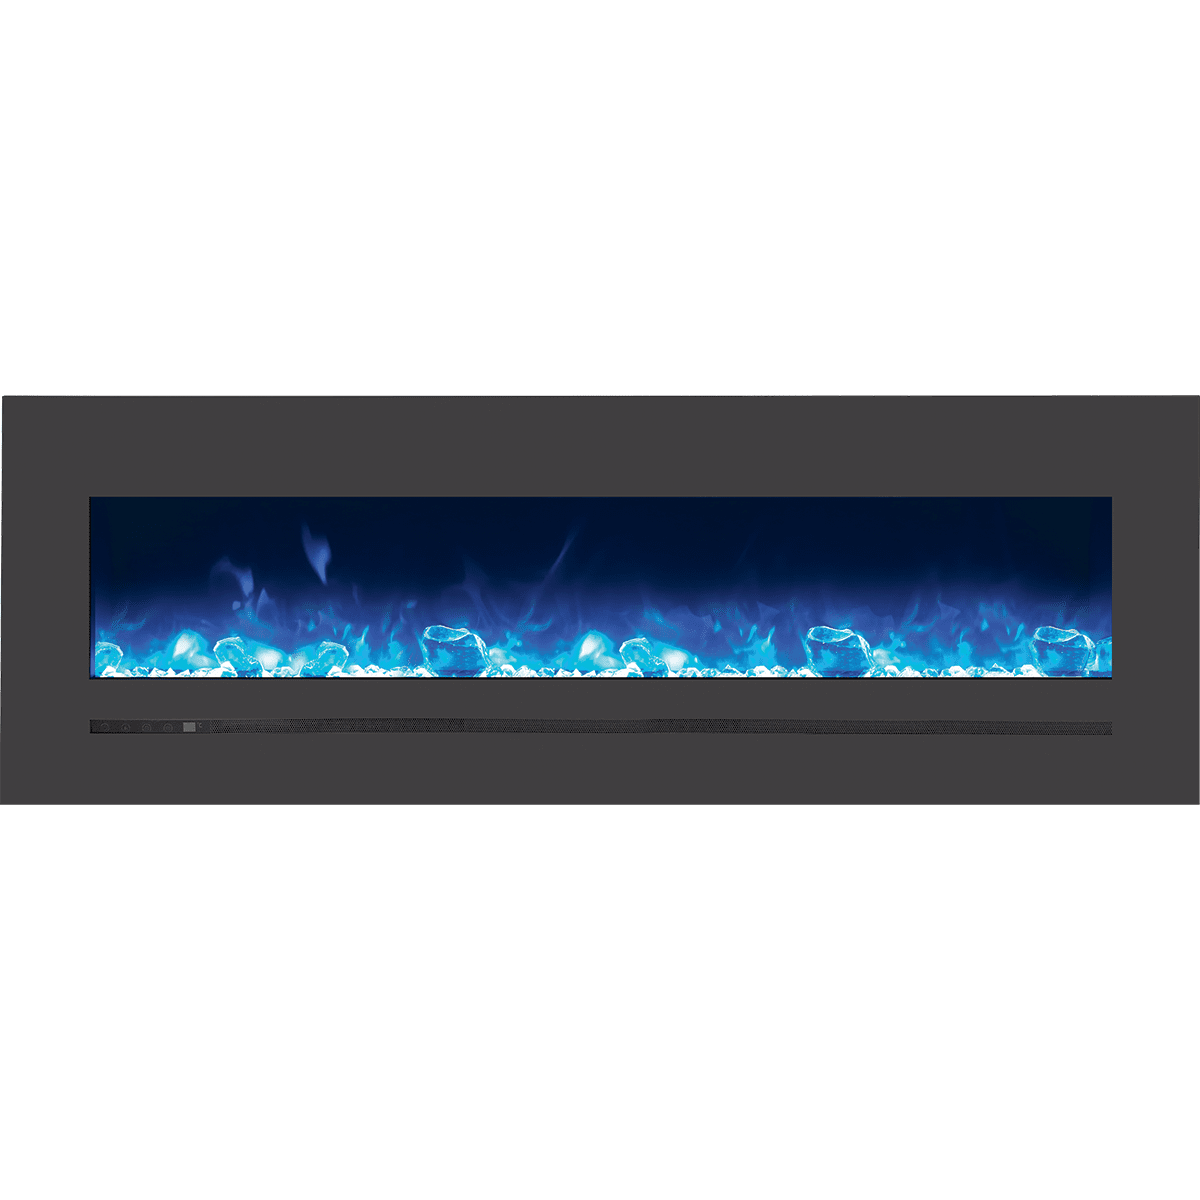 Sierra Flame Linear Series Wall Mount Electric Fireplace - 72 Inch